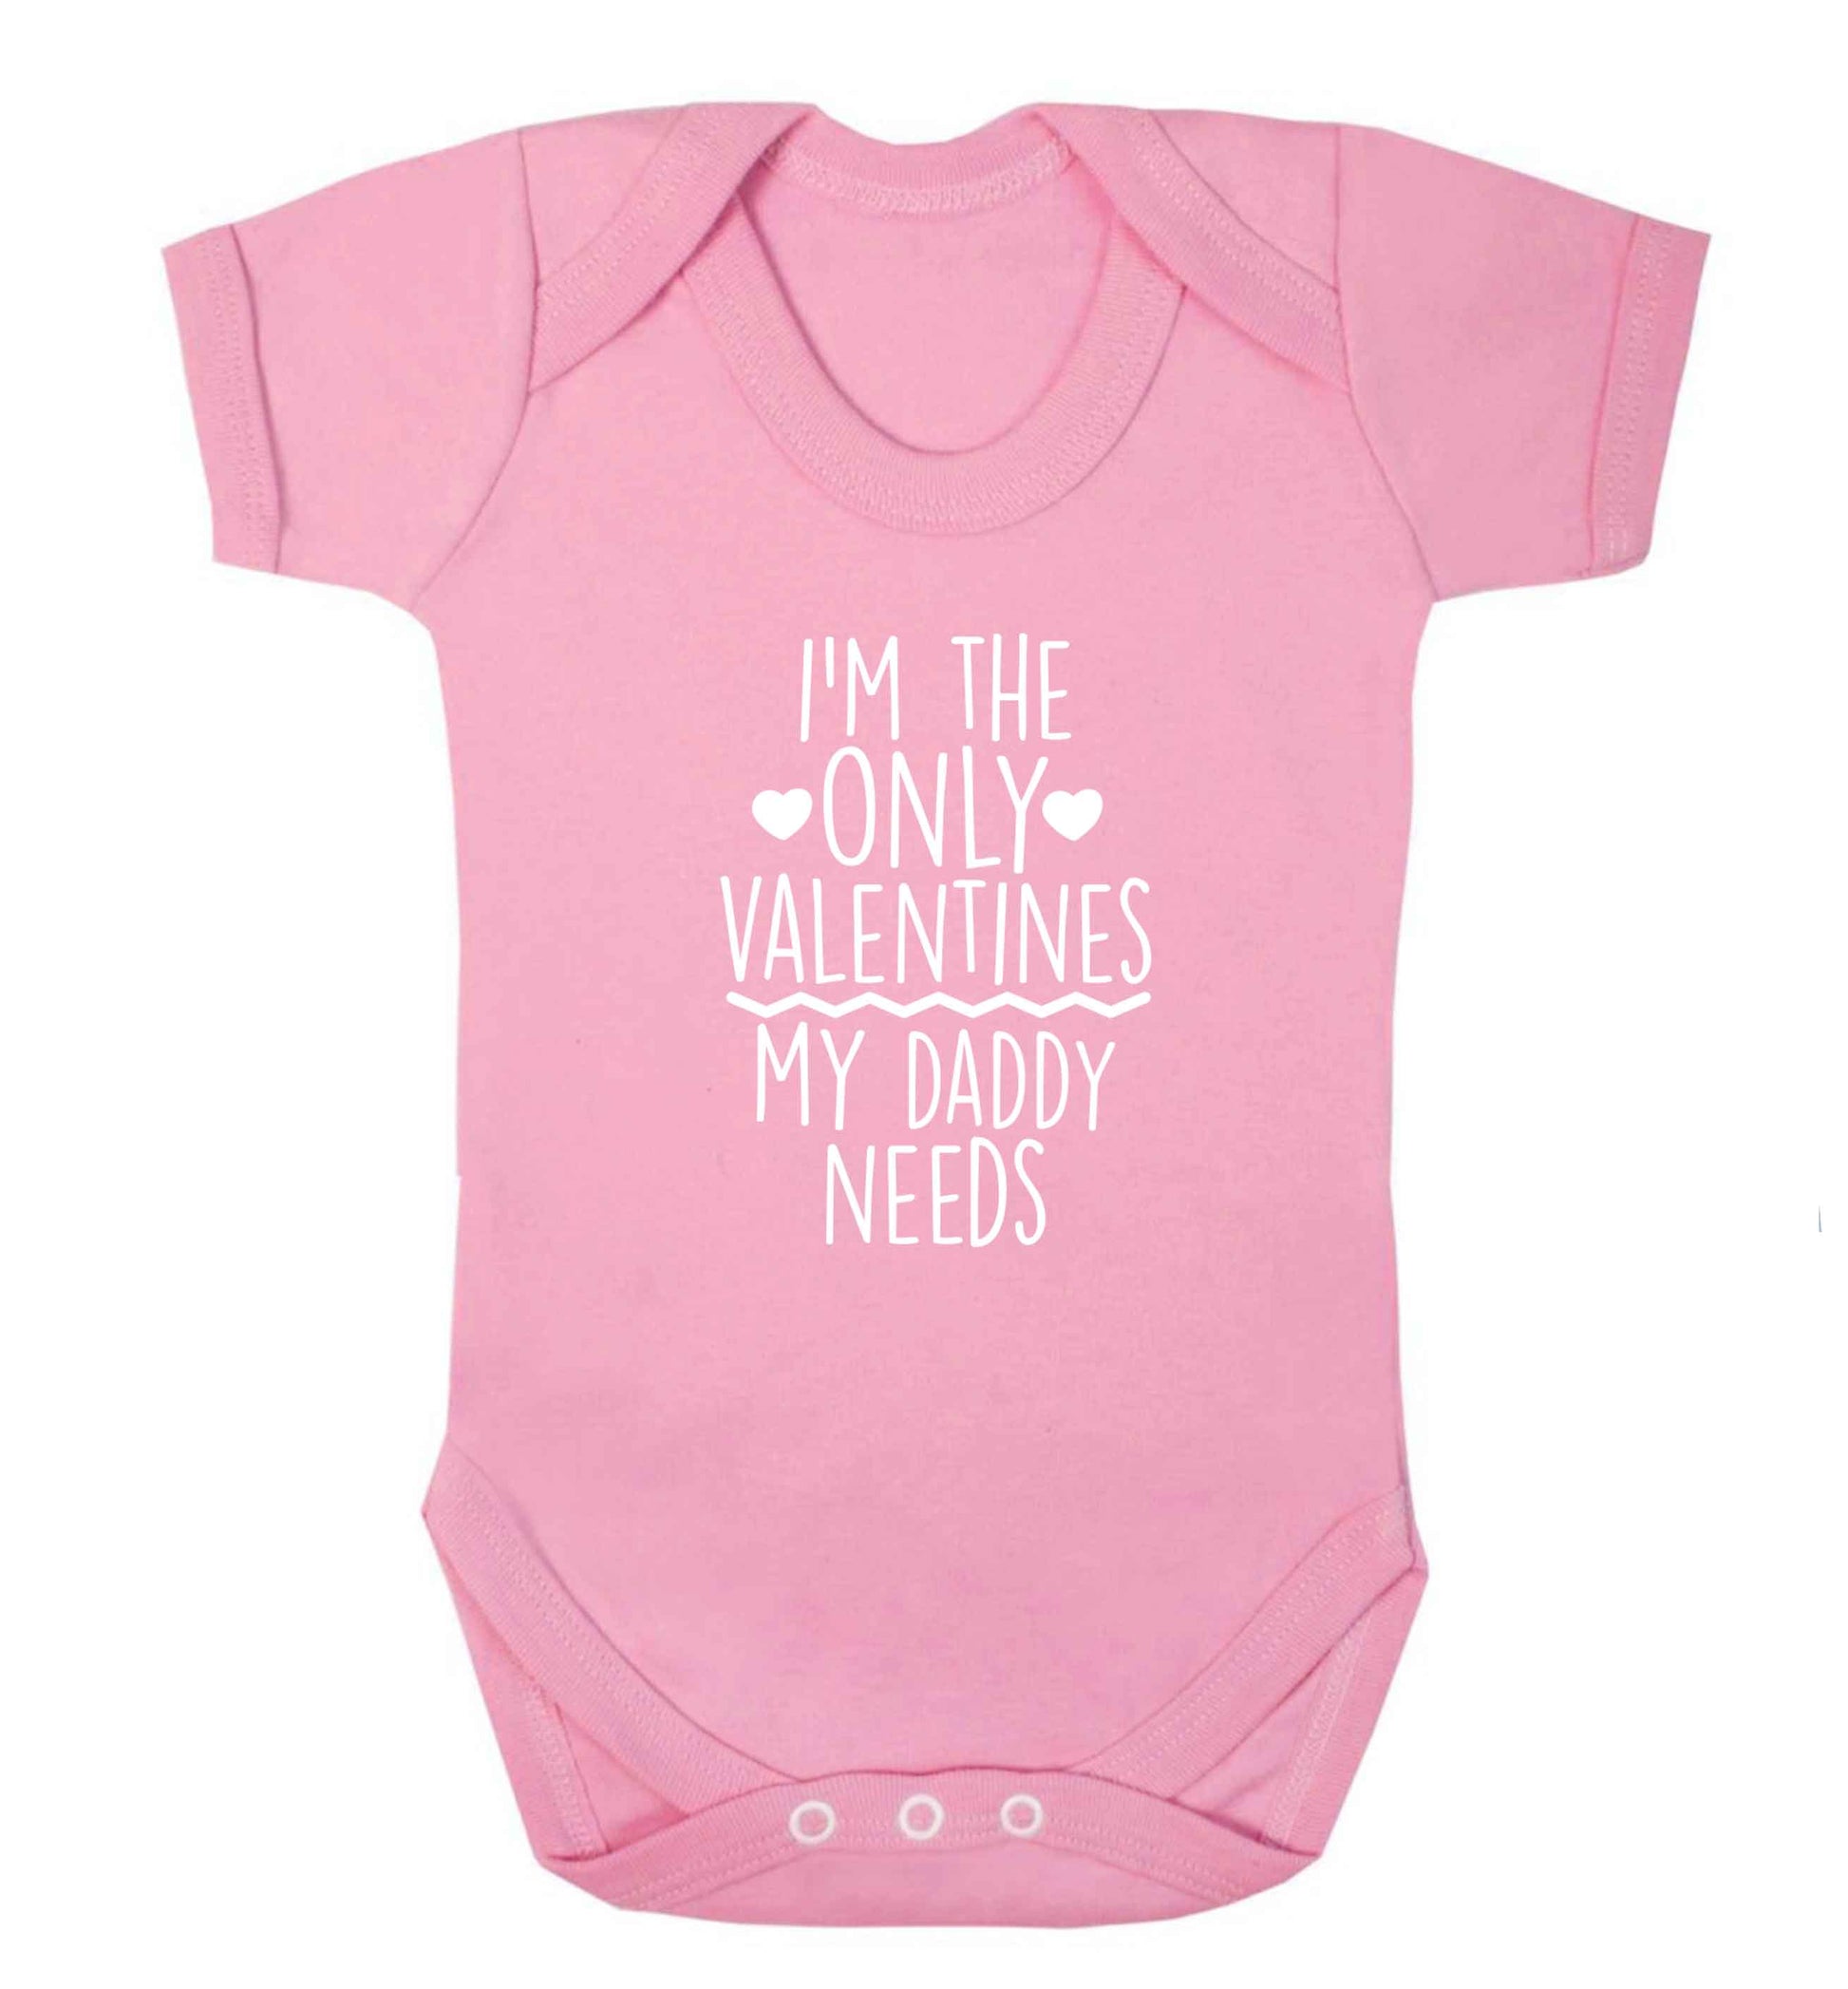 I'm the only valentines my daddy needs baby vest pale pink 18-24 months